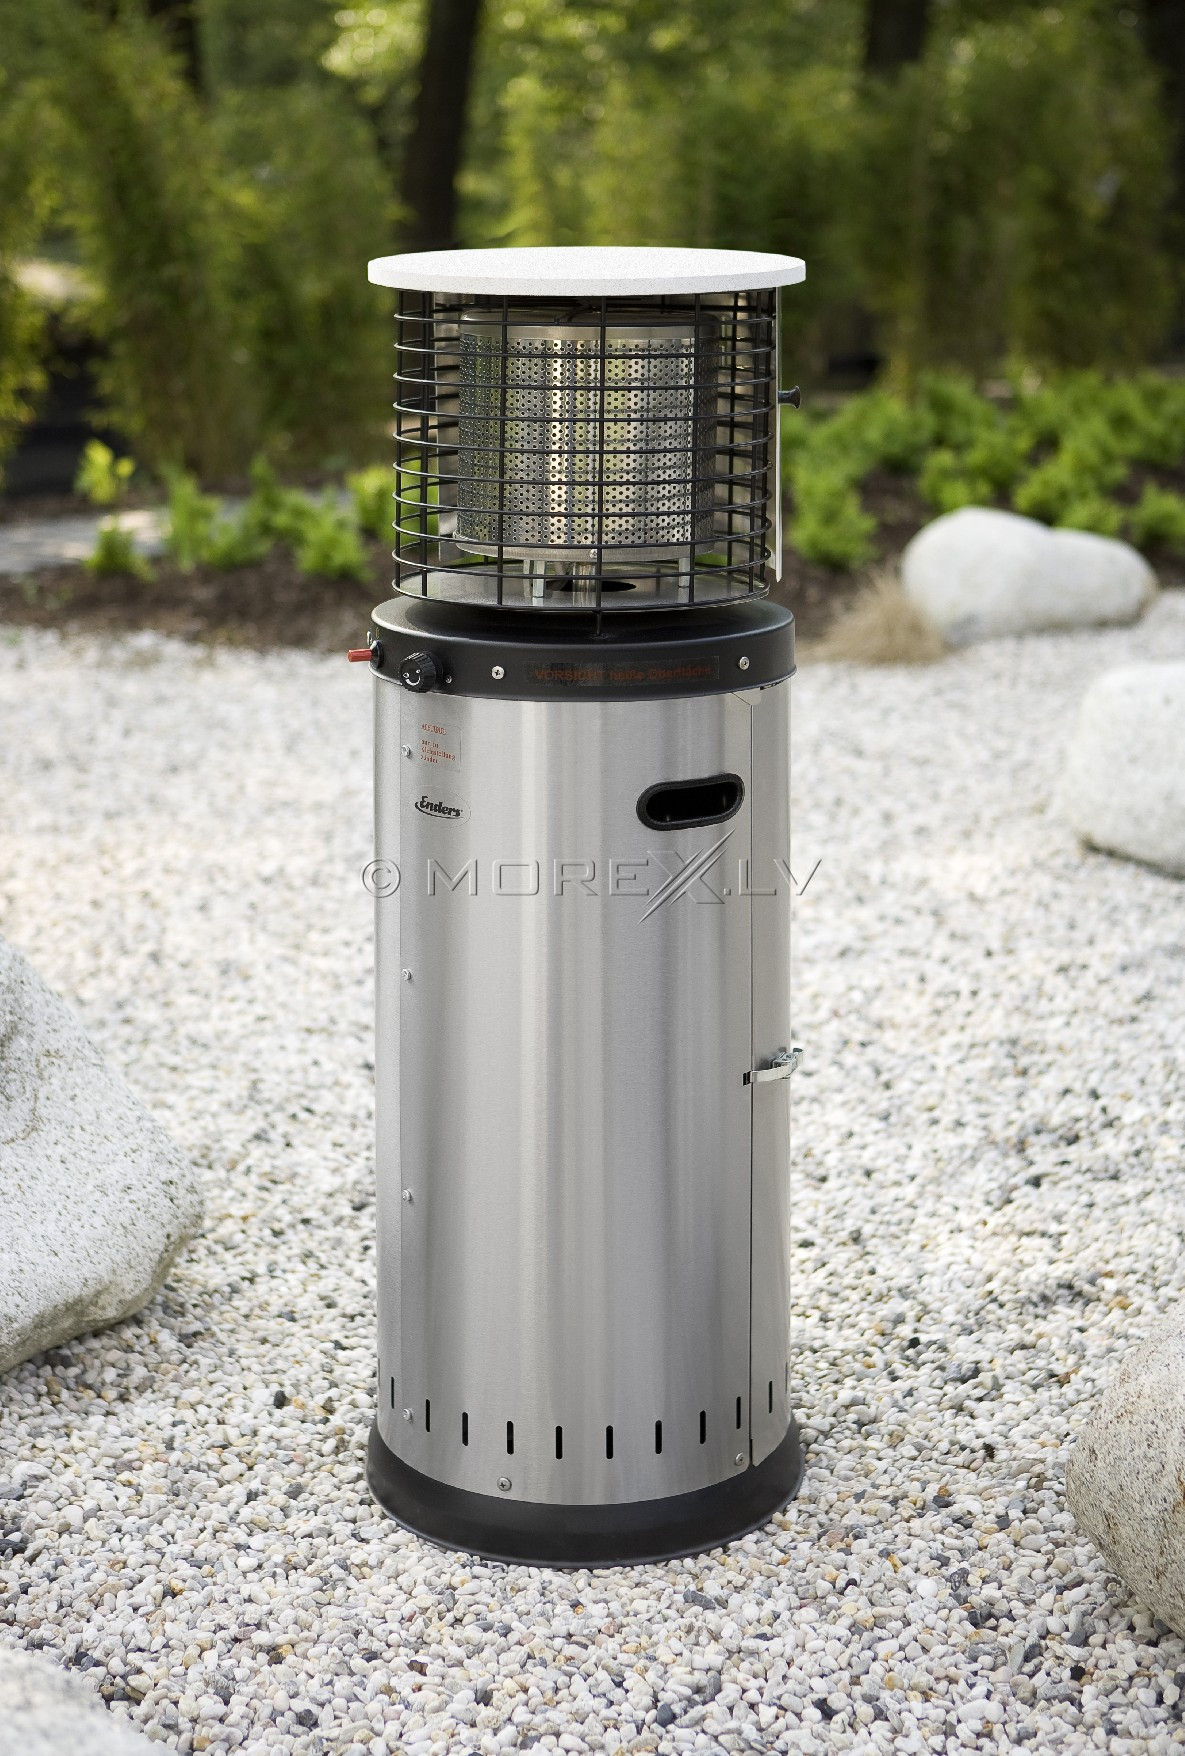 Outdoor heater Enders Polo 2.0 